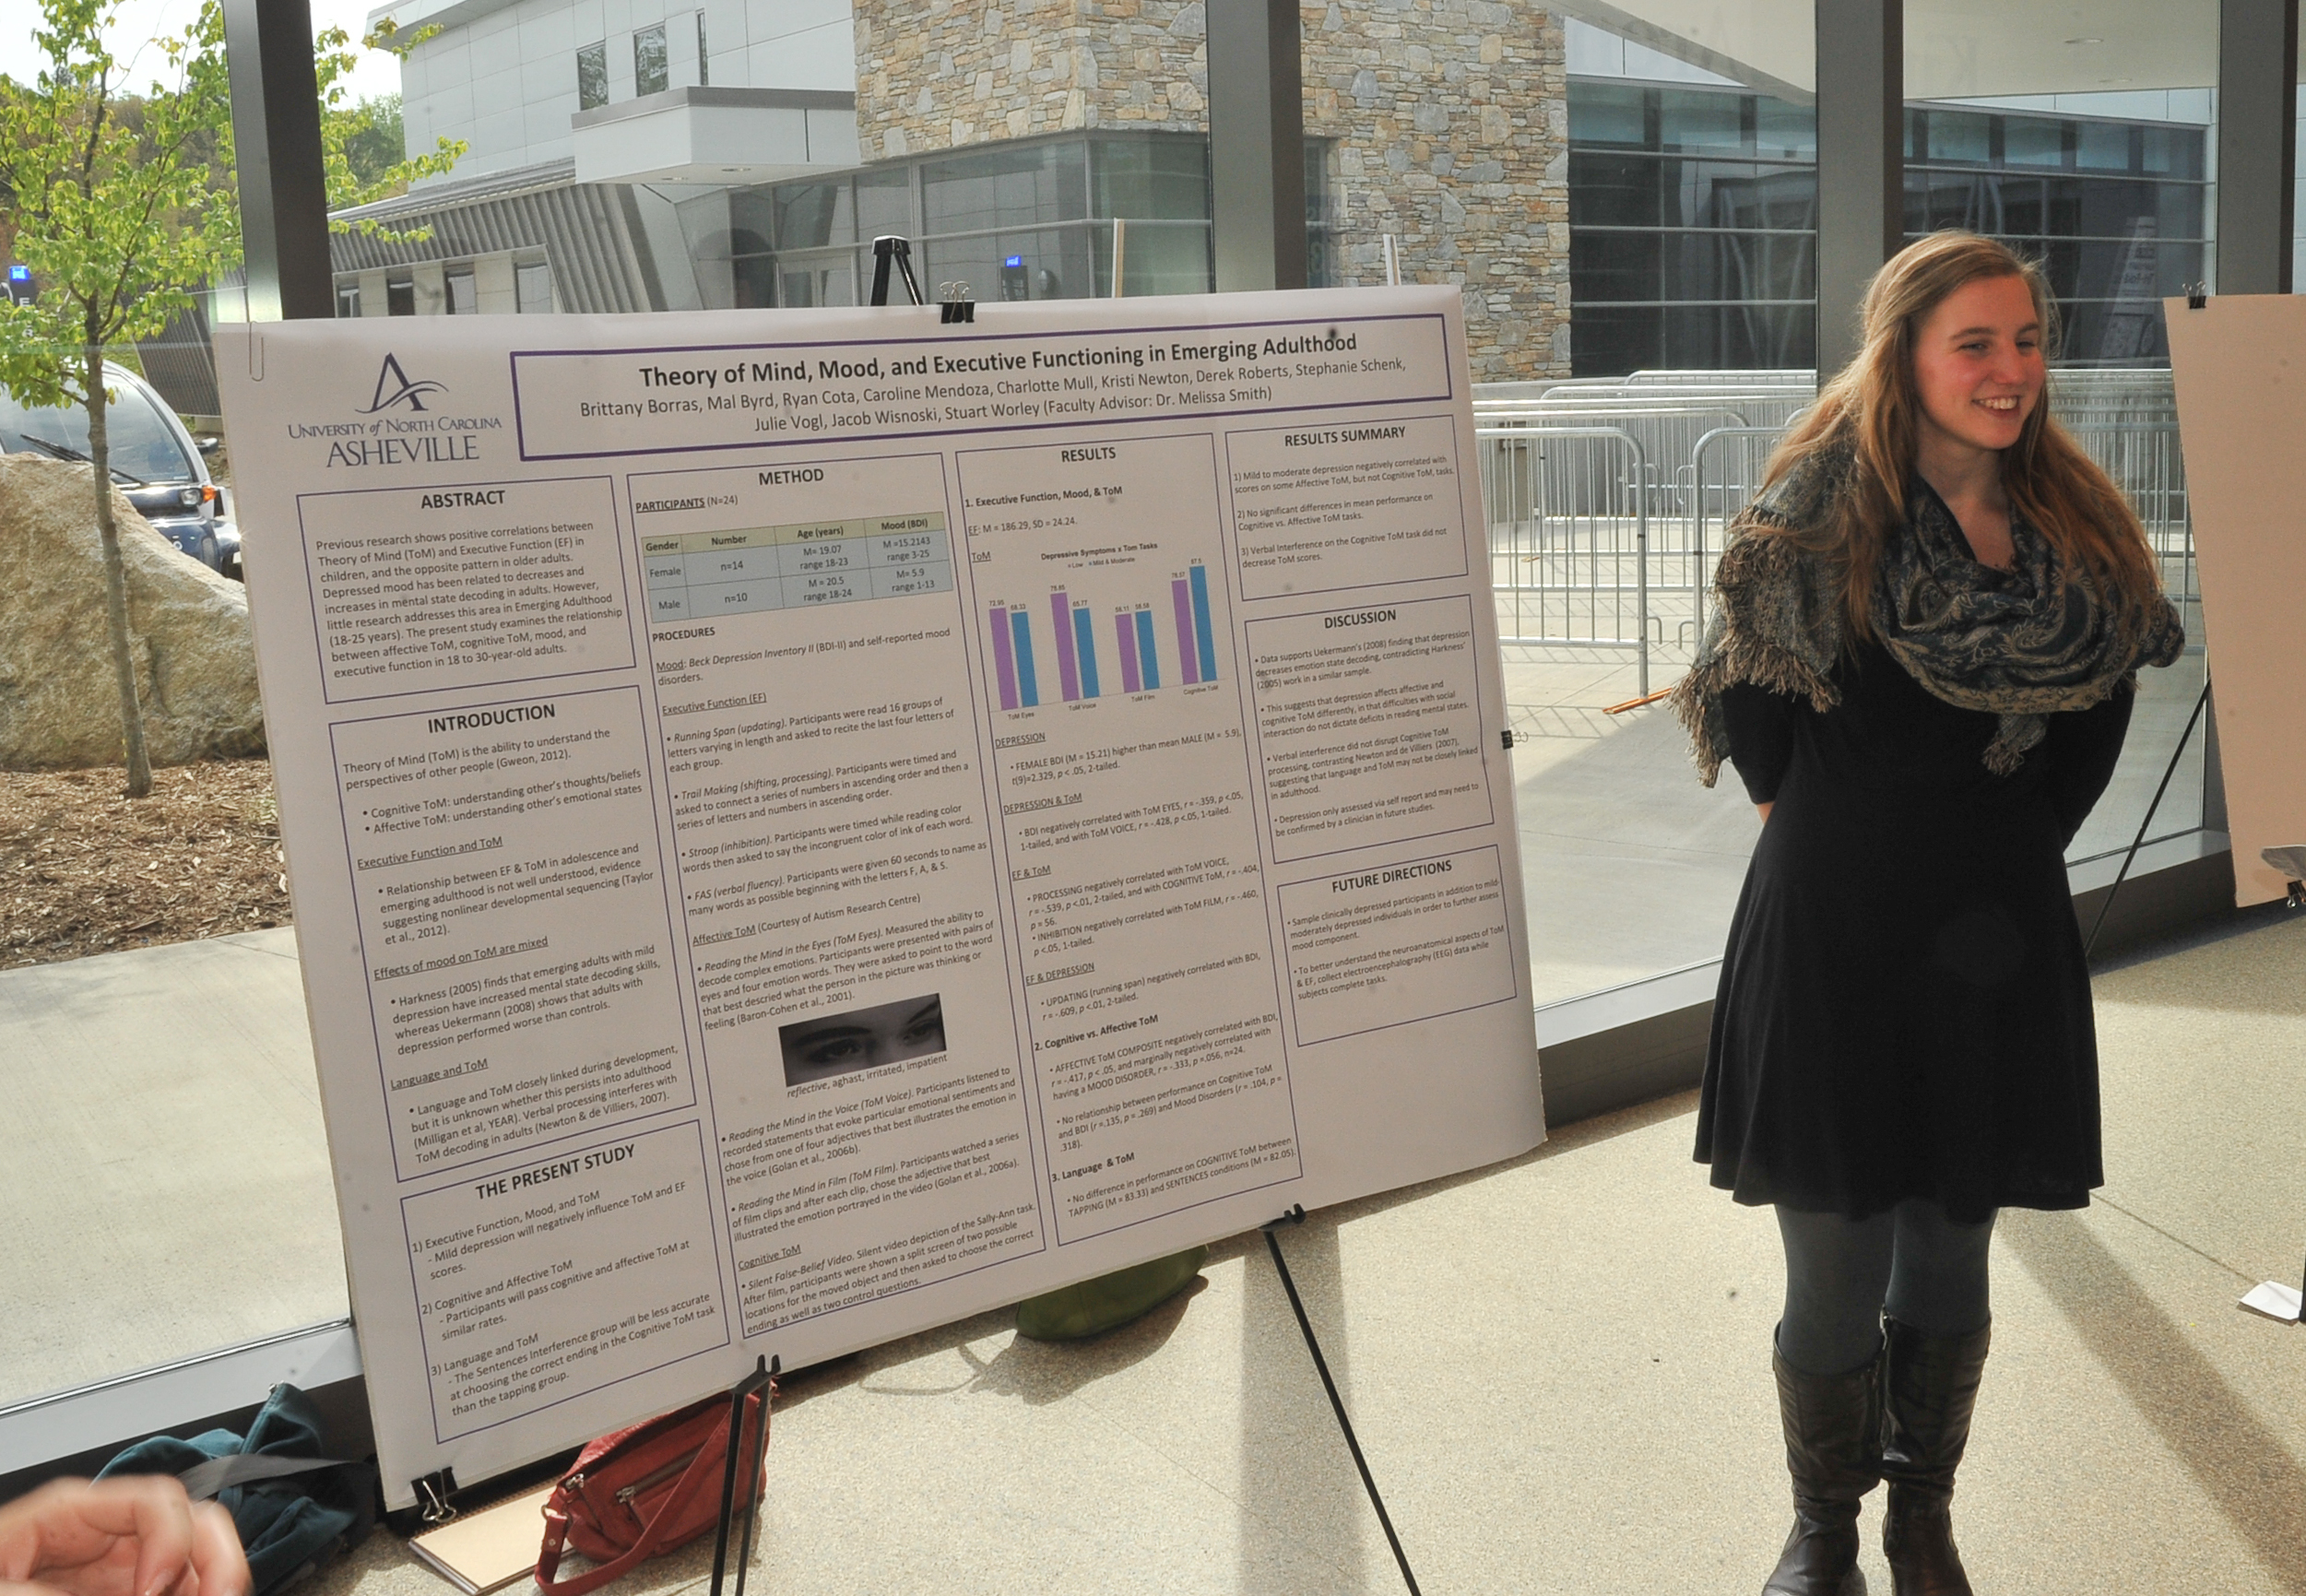 A student presenting undergraduate research on executive functioning in adulthood